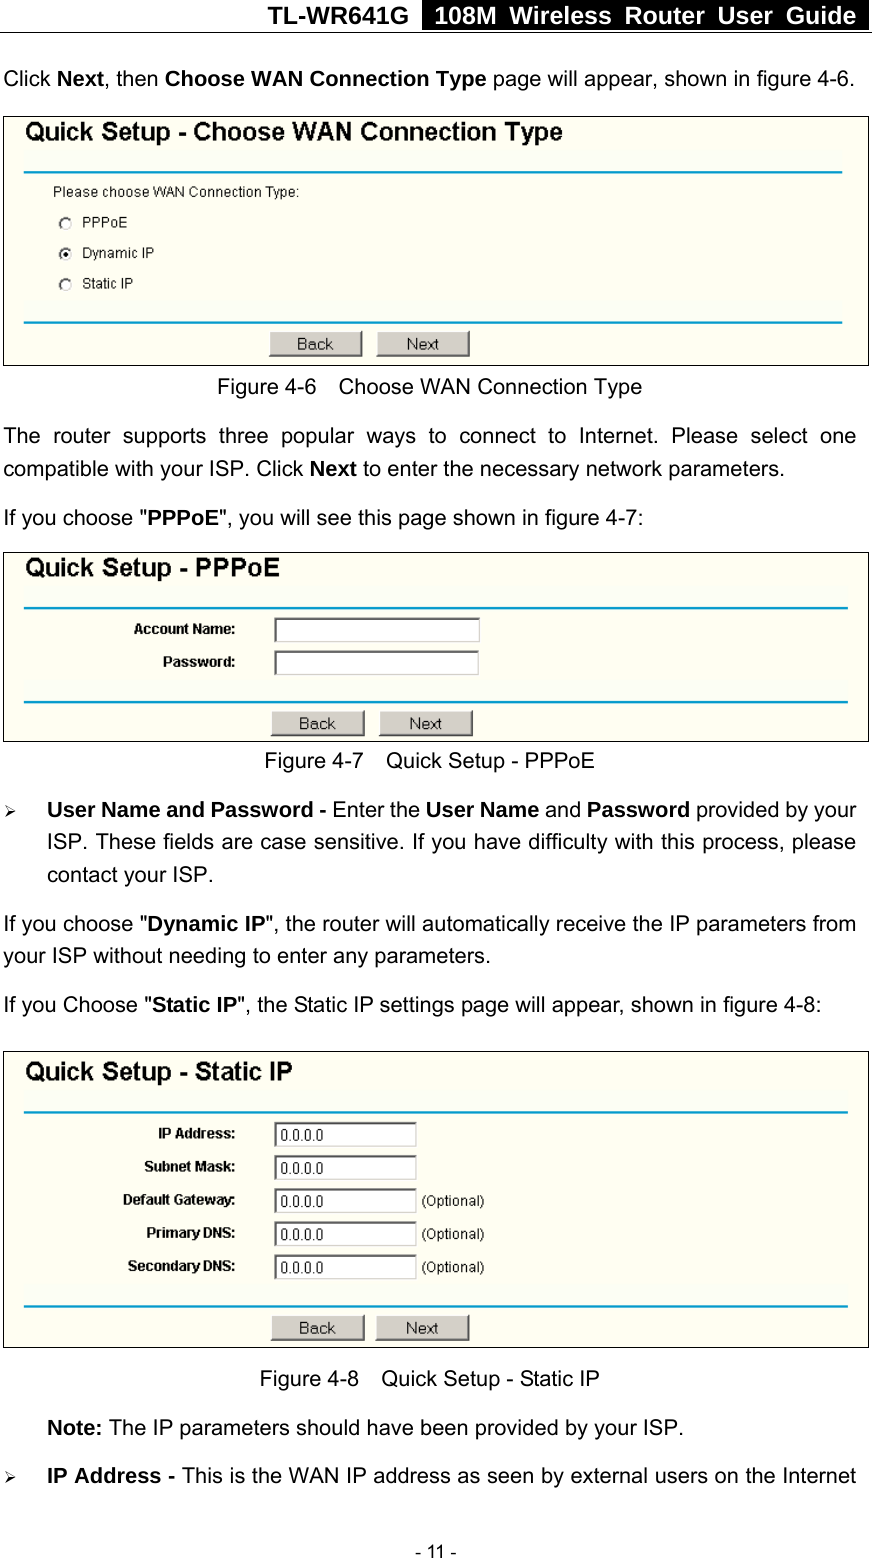 TL-WR641G   108M Wireless Router User Guide  Click Next, then Choose WAN Connection Type page will appear, shown in figure 4-6.  Figure 4-6    Choose WAN Connection Type The router supports three popular ways to connect to Internet. Please select one compatible with your ISP. Click Next to enter the necessary network parameters. If you choose &quot;PPPoE&quot;, you will see this page shown in figure 4-7:    Figure 4-7    Quick Setup - PPPoE ¾ User Name and Password - Enter the User Name and Password provided by your ISP. These fields are case sensitive. If you have difficulty with this process, please contact your ISP. If you choose &quot;Dynamic IP&quot;, the router will automatically receive the IP parameters from your ISP without needing to enter any parameters. If you Choose &quot;Static IP&quot;, the Static IP settings page will appear, shown in figure 4-8:    Figure 4-8    Quick Setup - Static IP  Note: The IP parameters should have been provided by your ISP. ¾ IP Address - This is the WAN IP address as seen by external users on the Internet  - 11 - 